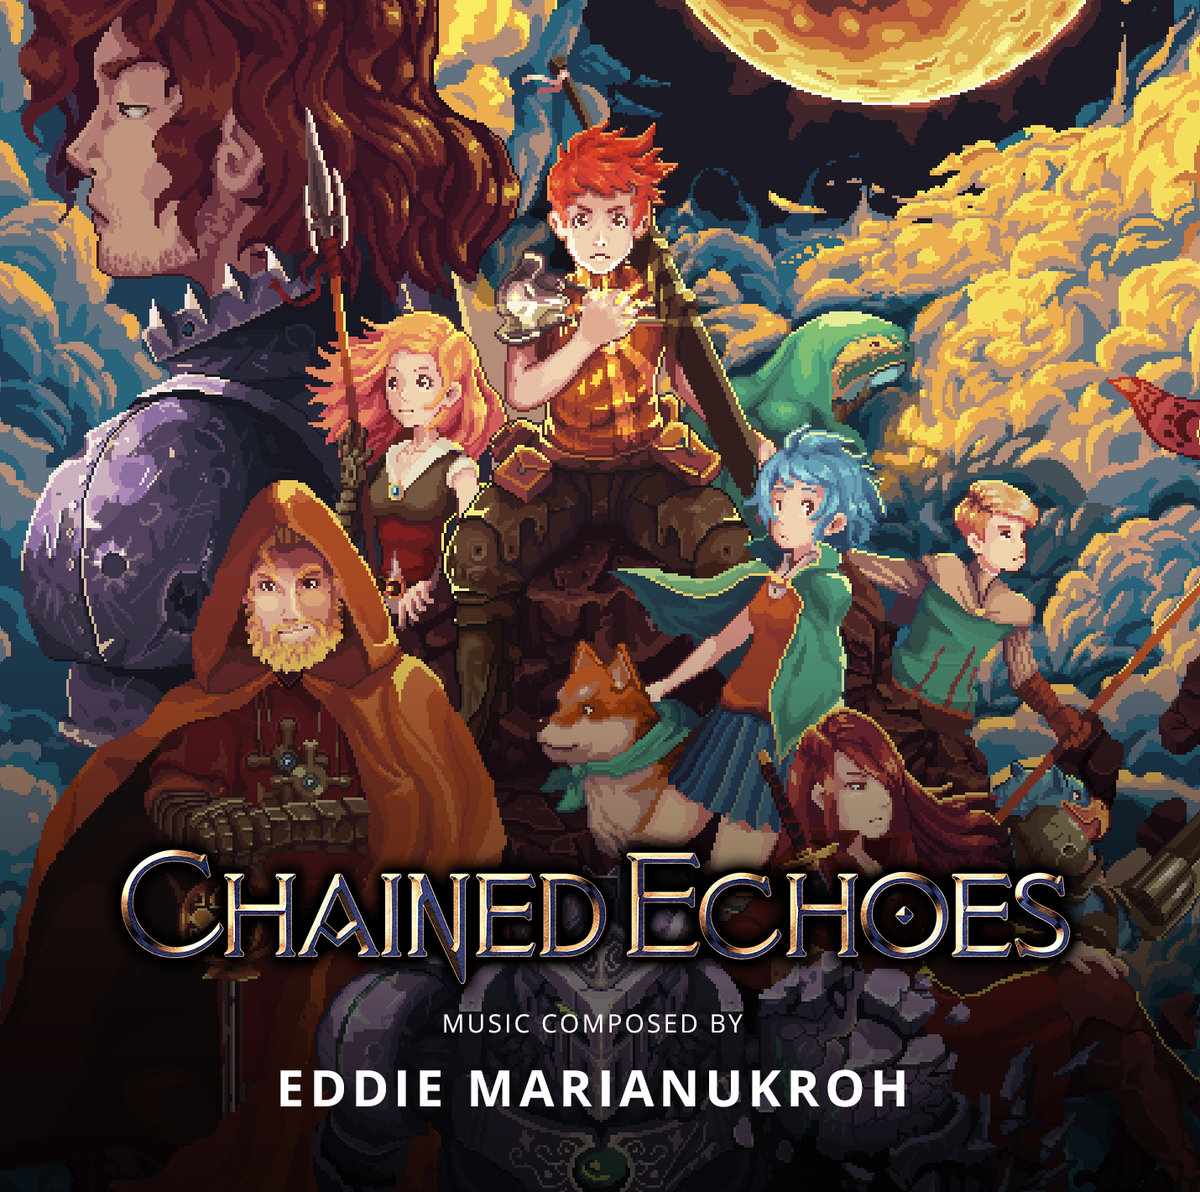 chained echoes ps4 download free